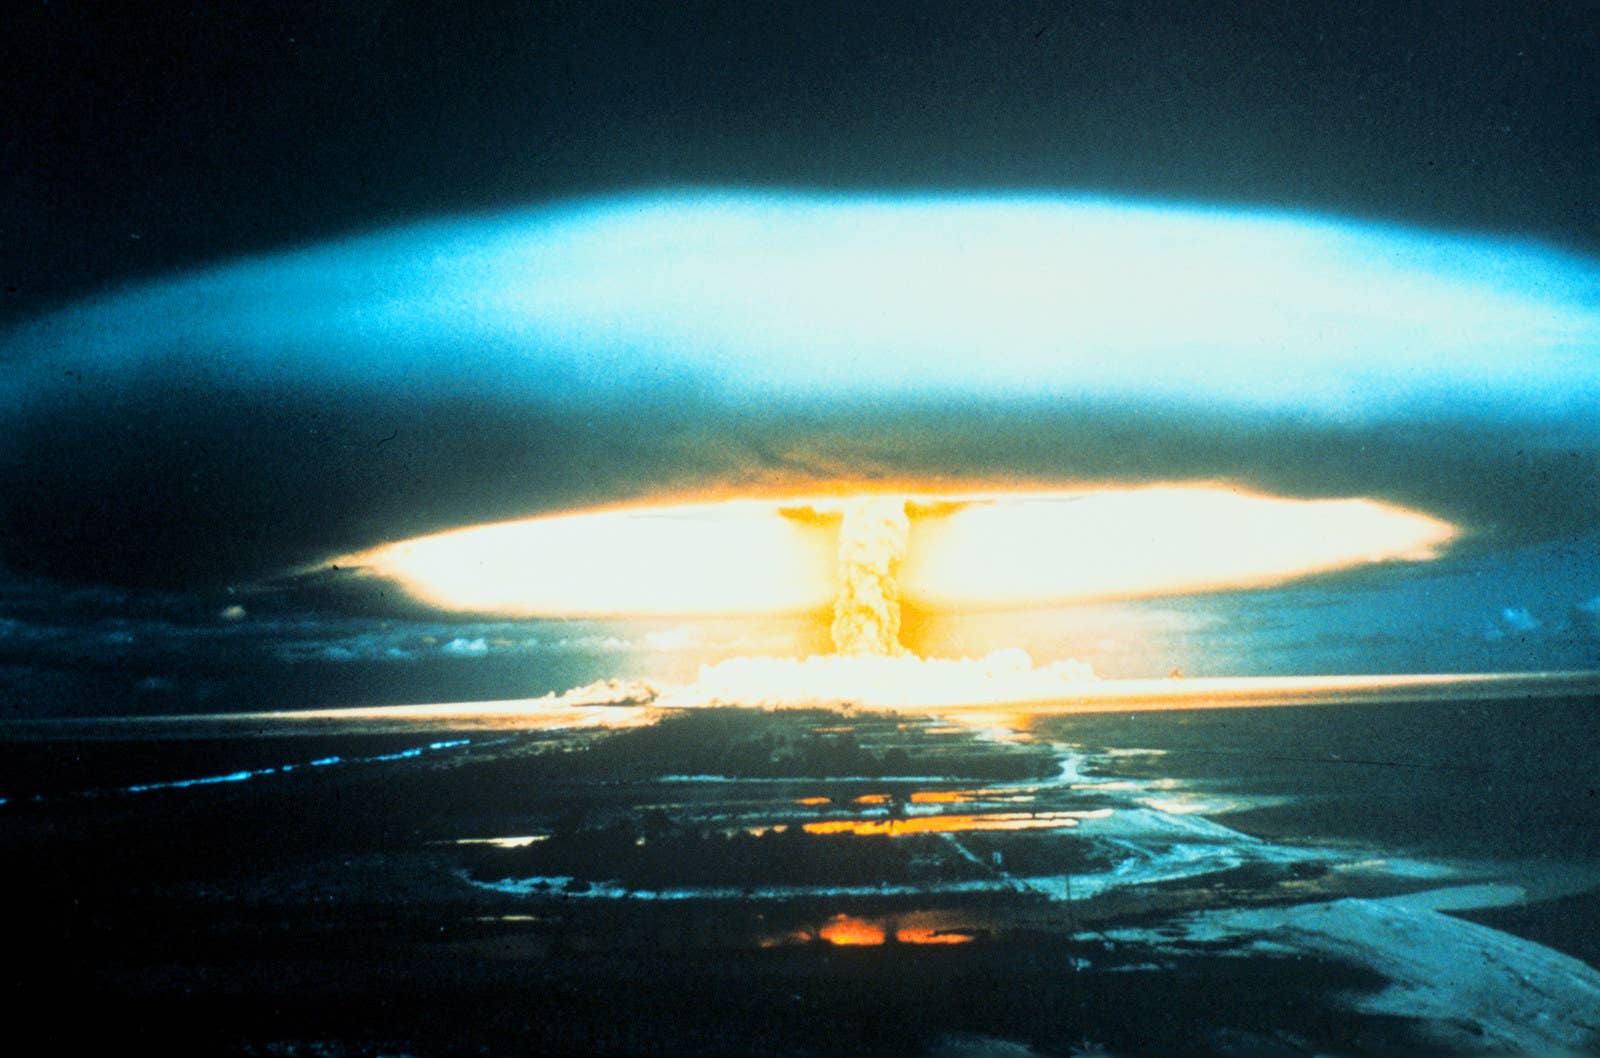 A 150-megaton thermonuclear bomb explodes over the Bikini Atoll on March 1, 1954. The unexpected spread of fallout from the test led to an increased awareness of, and research into, radioactive pollution.